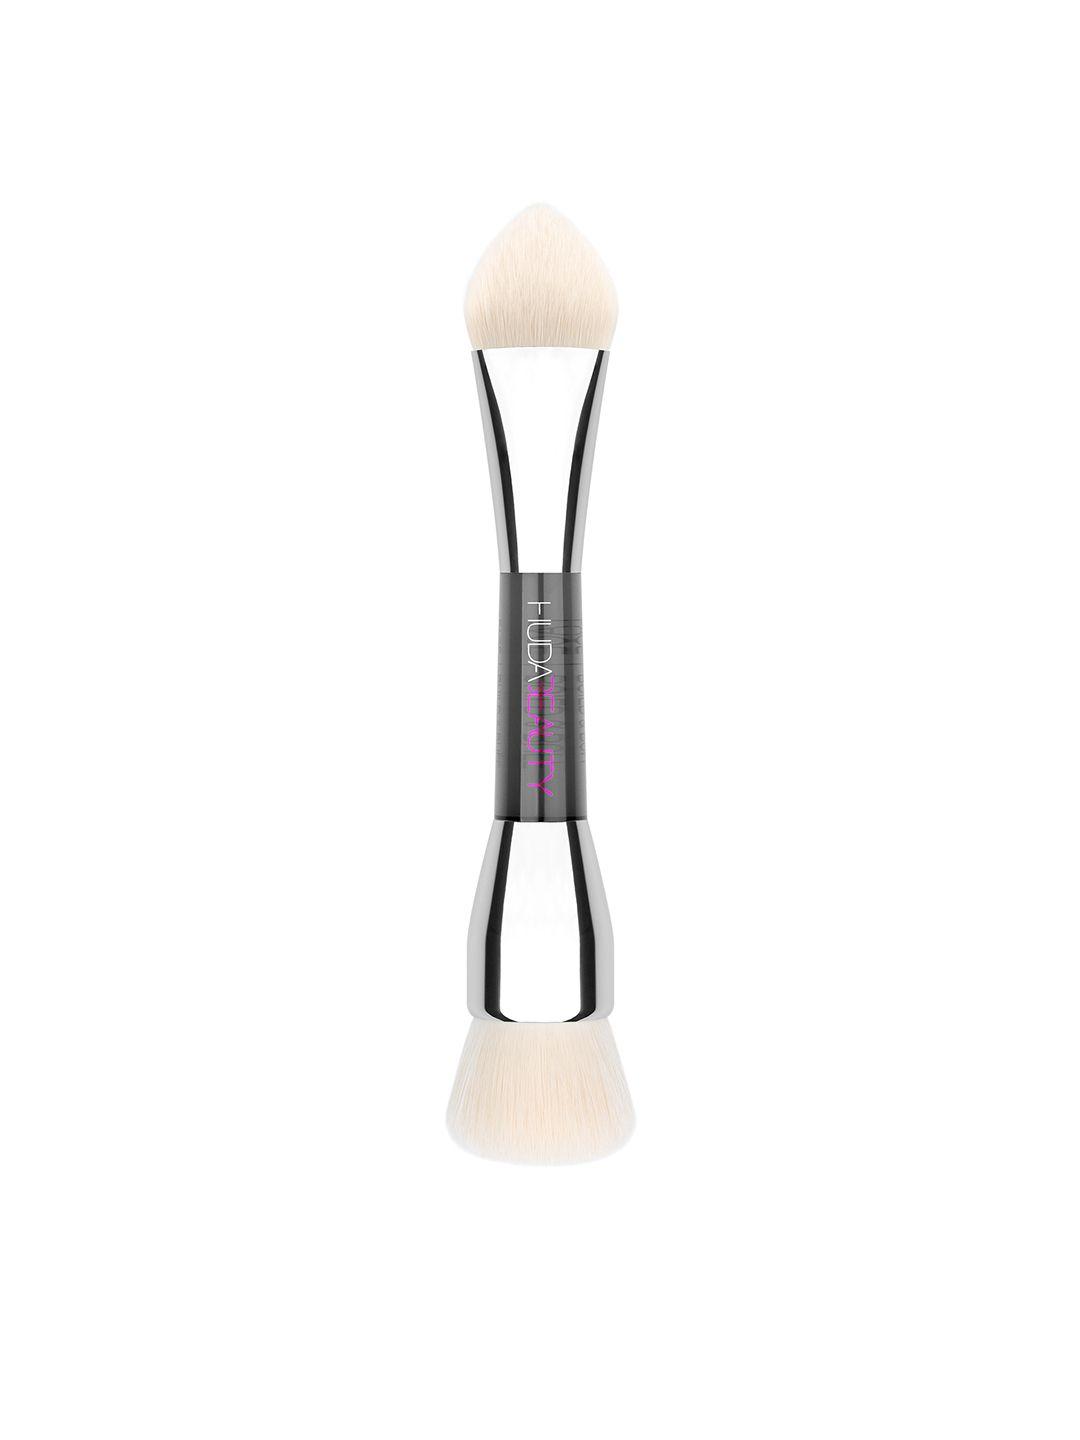 huda beauty double ended foundation brush - silver-toned